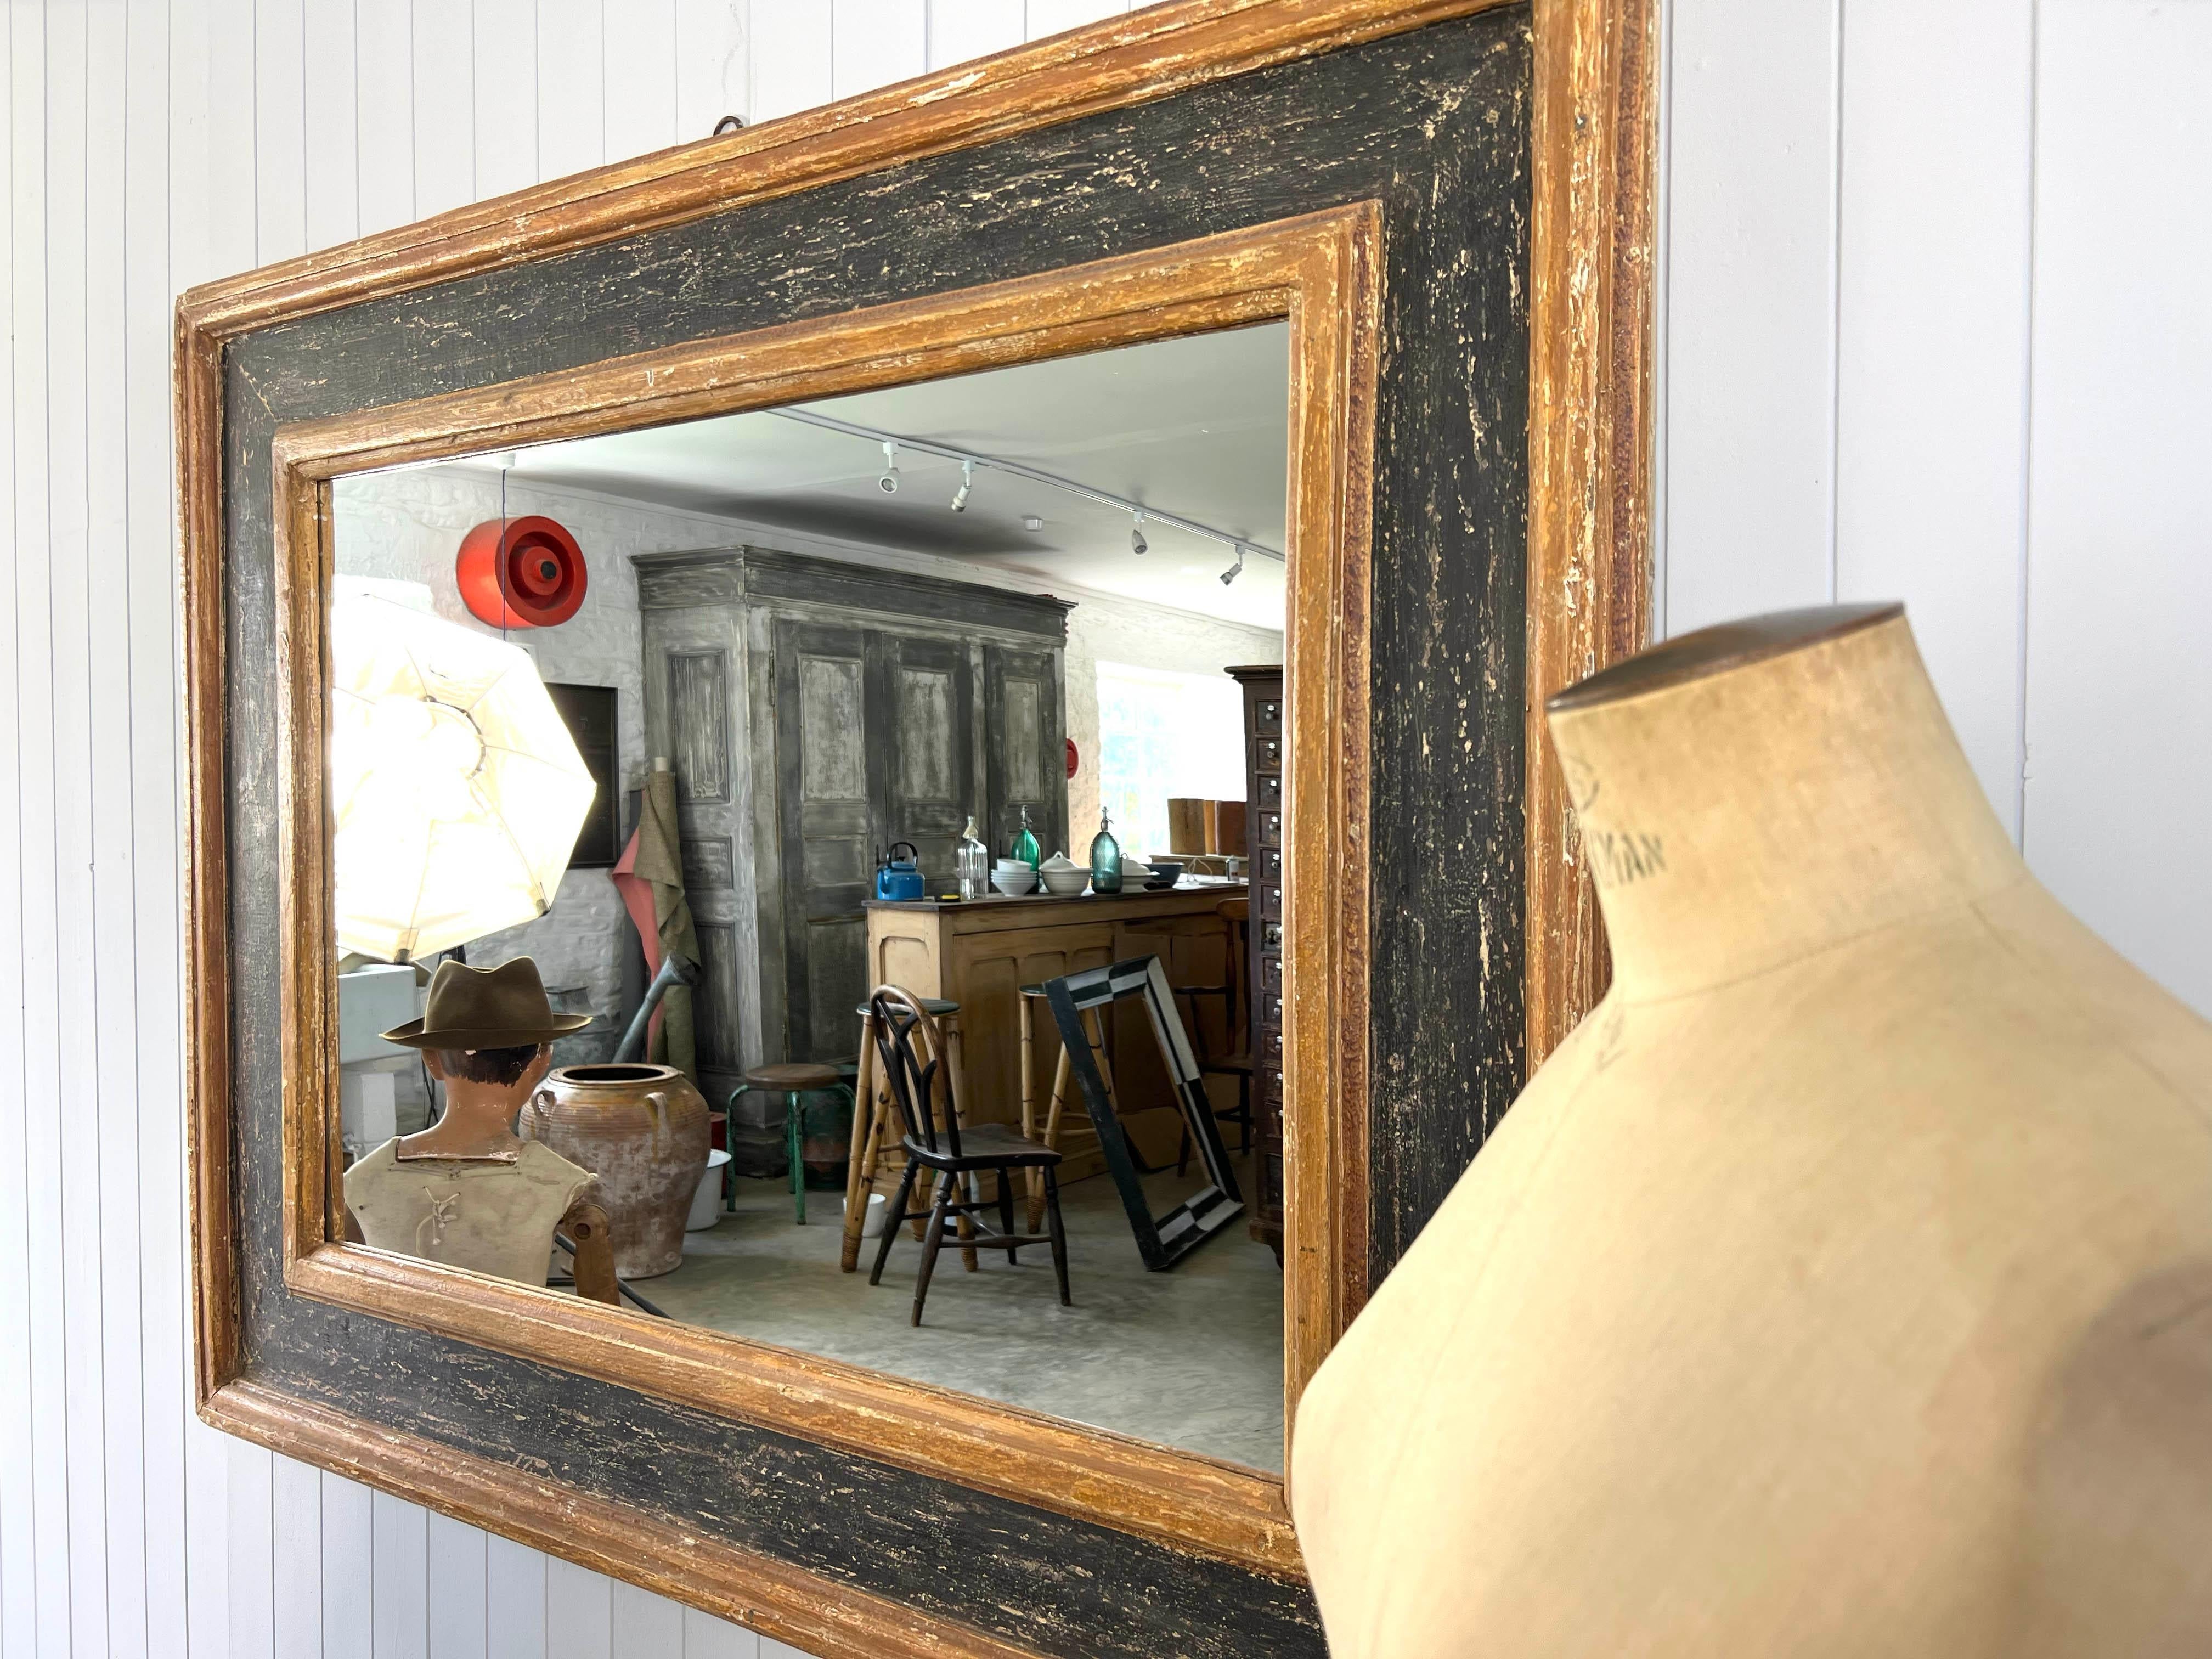 Sourced in Florence this carved rustic and painted frame dates back to Mid 19th Century - the glass is new.

The frame has been restored and the original paint has been gently knocked back, removing any flaky bits and producing this wonderful